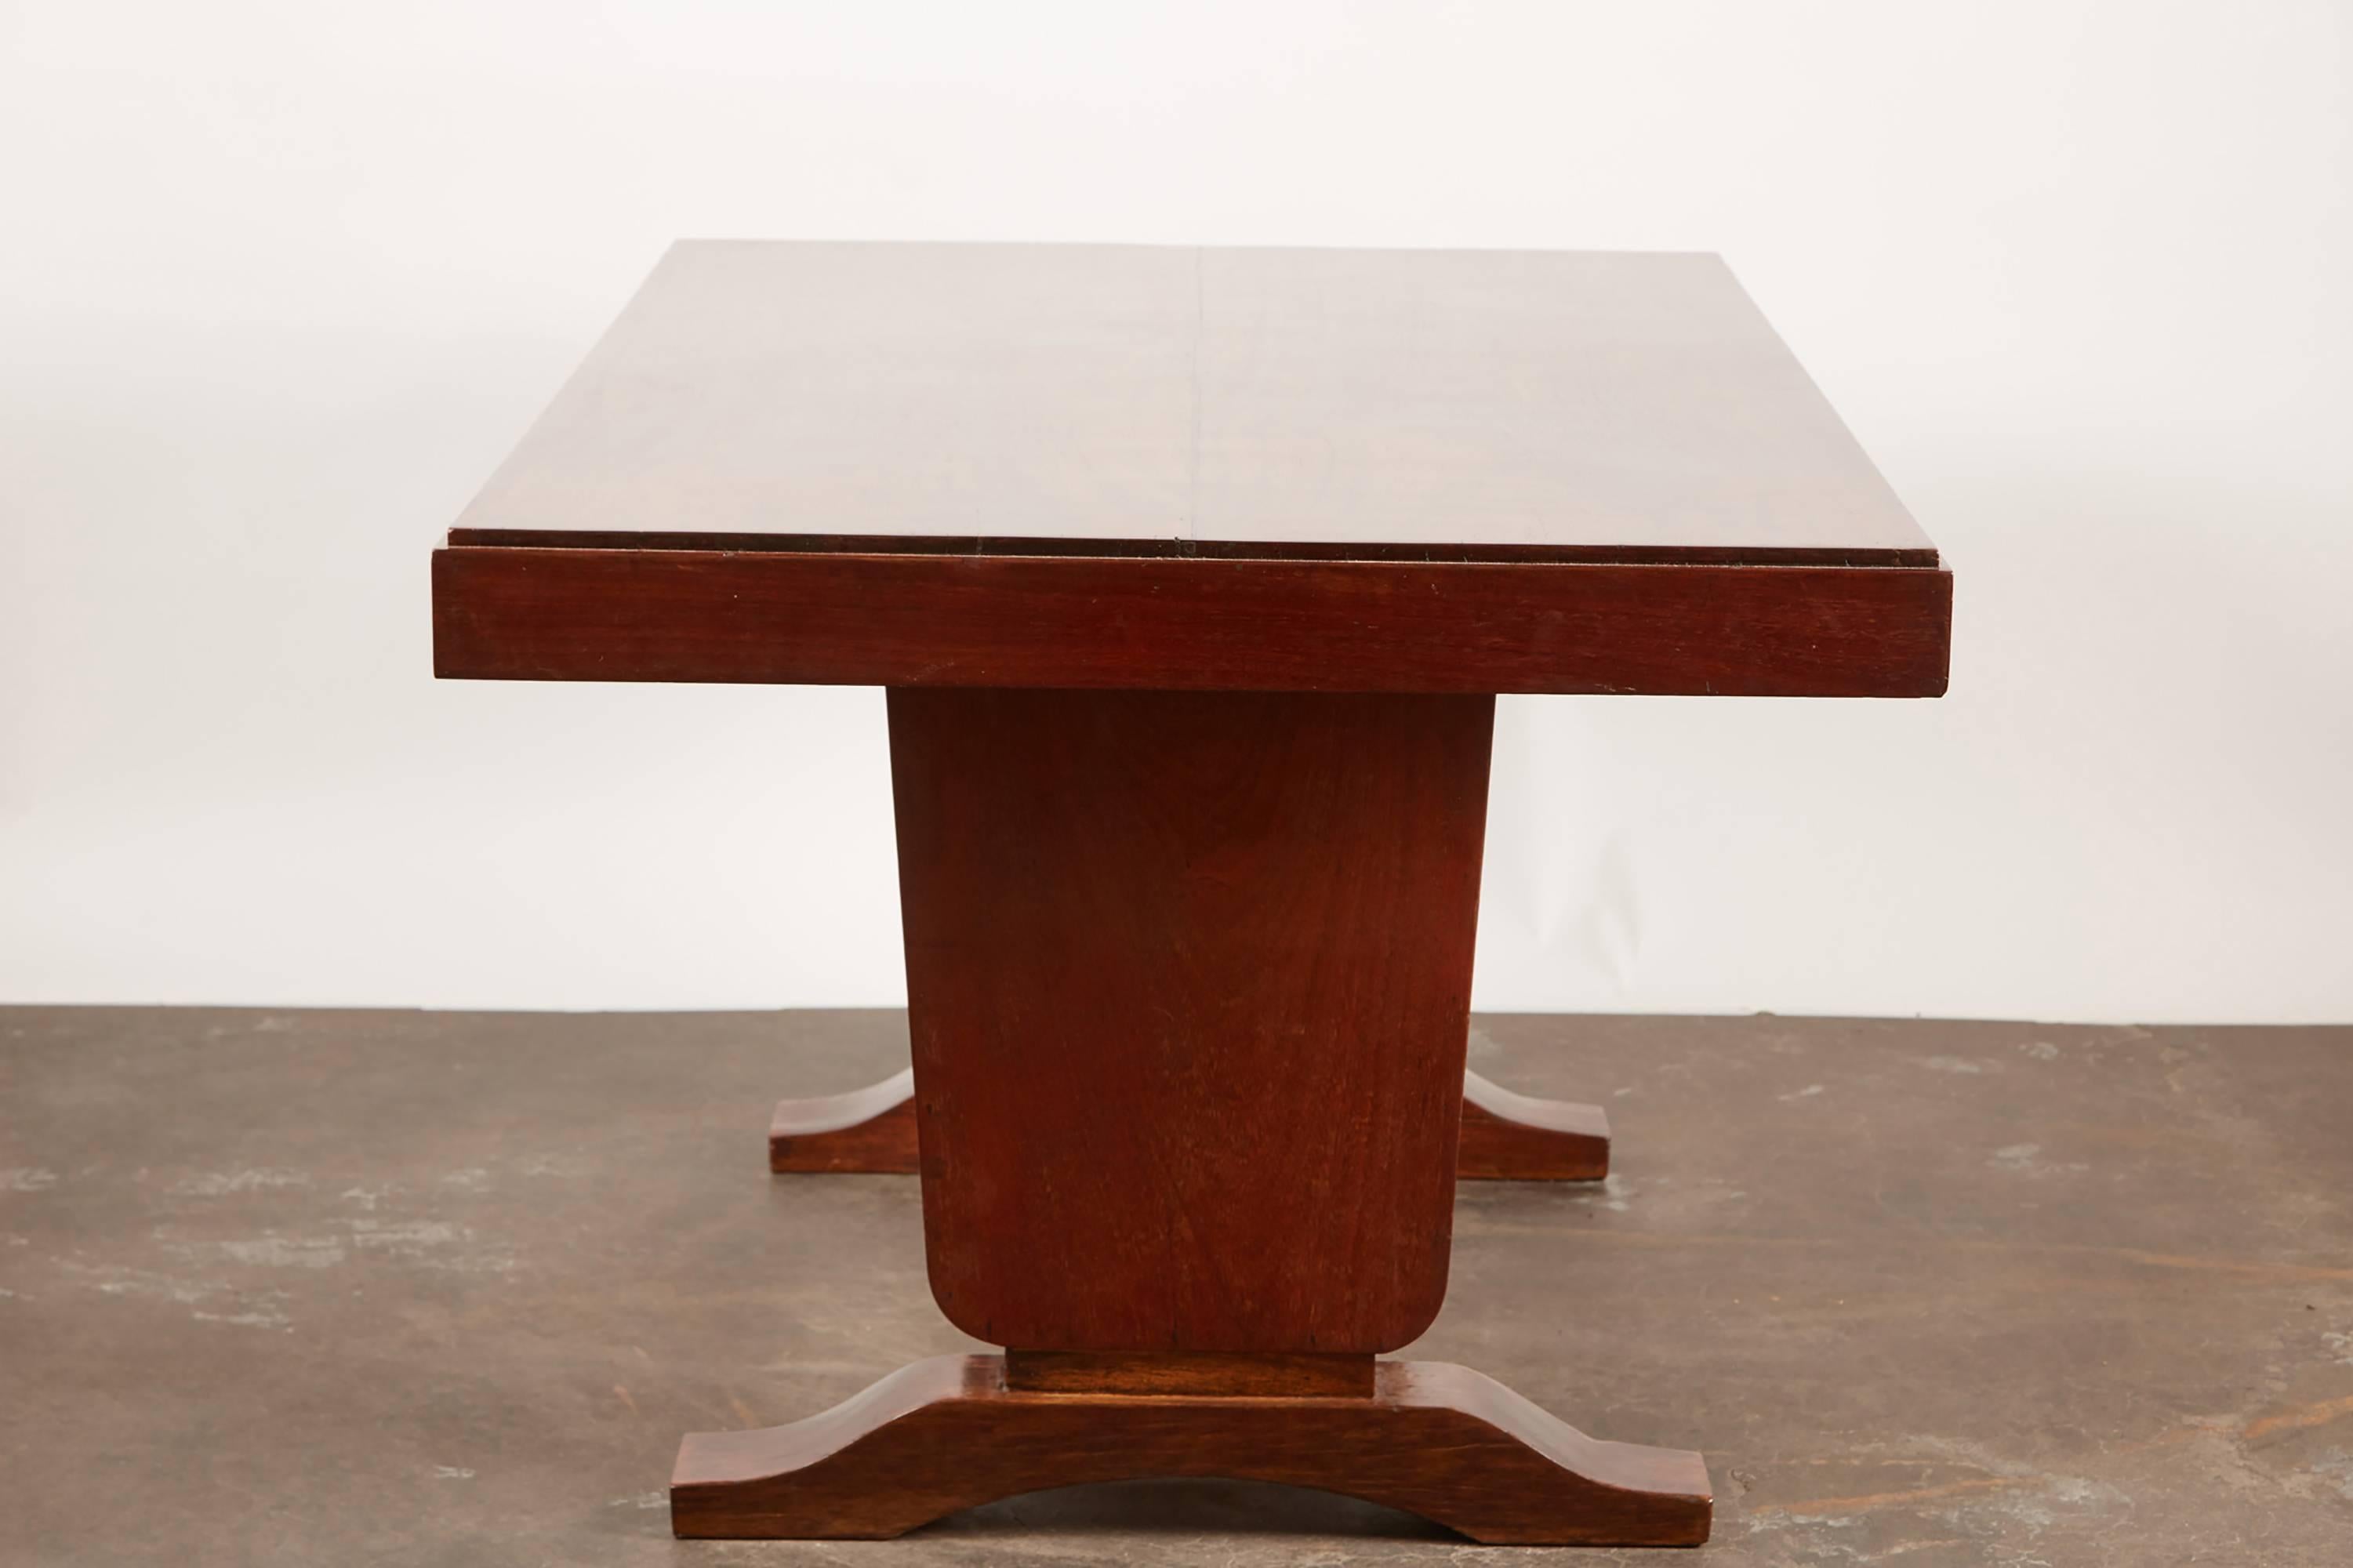 20th Century French Colonial Art Deco Rosewood Desk For Sale 3